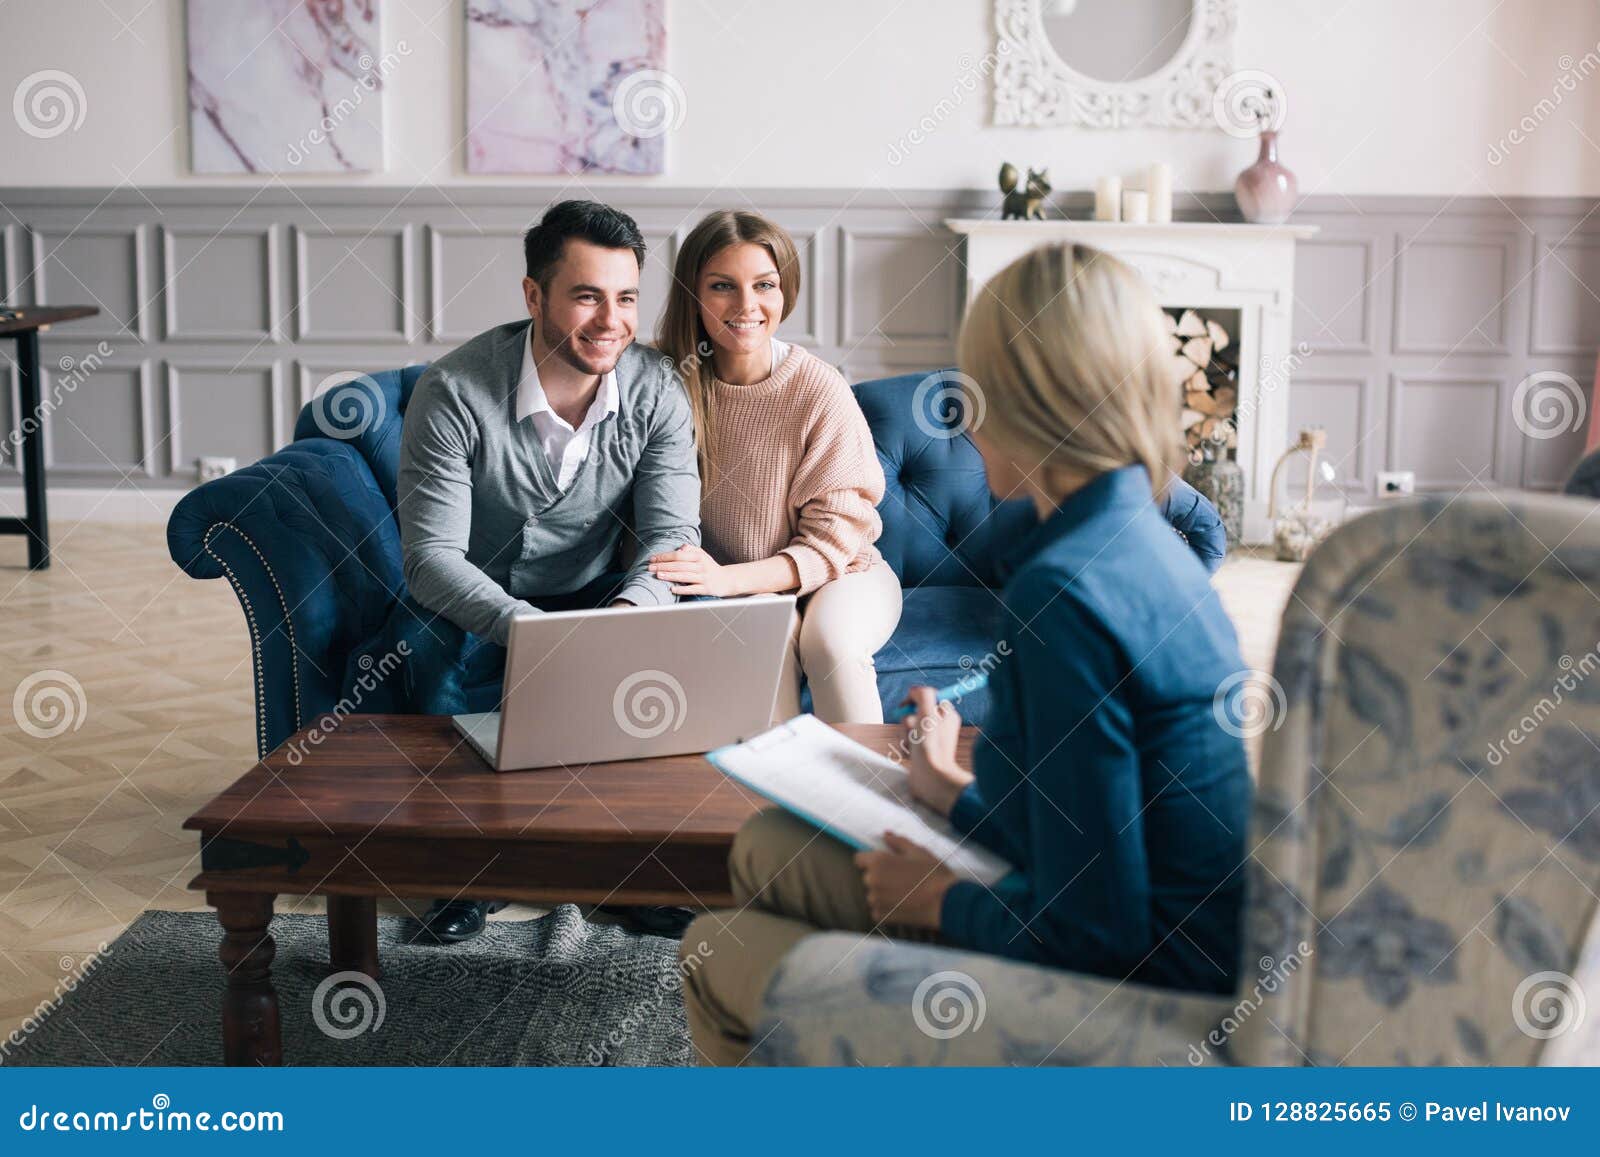 successful agent giving consultation to family couple about buying house.